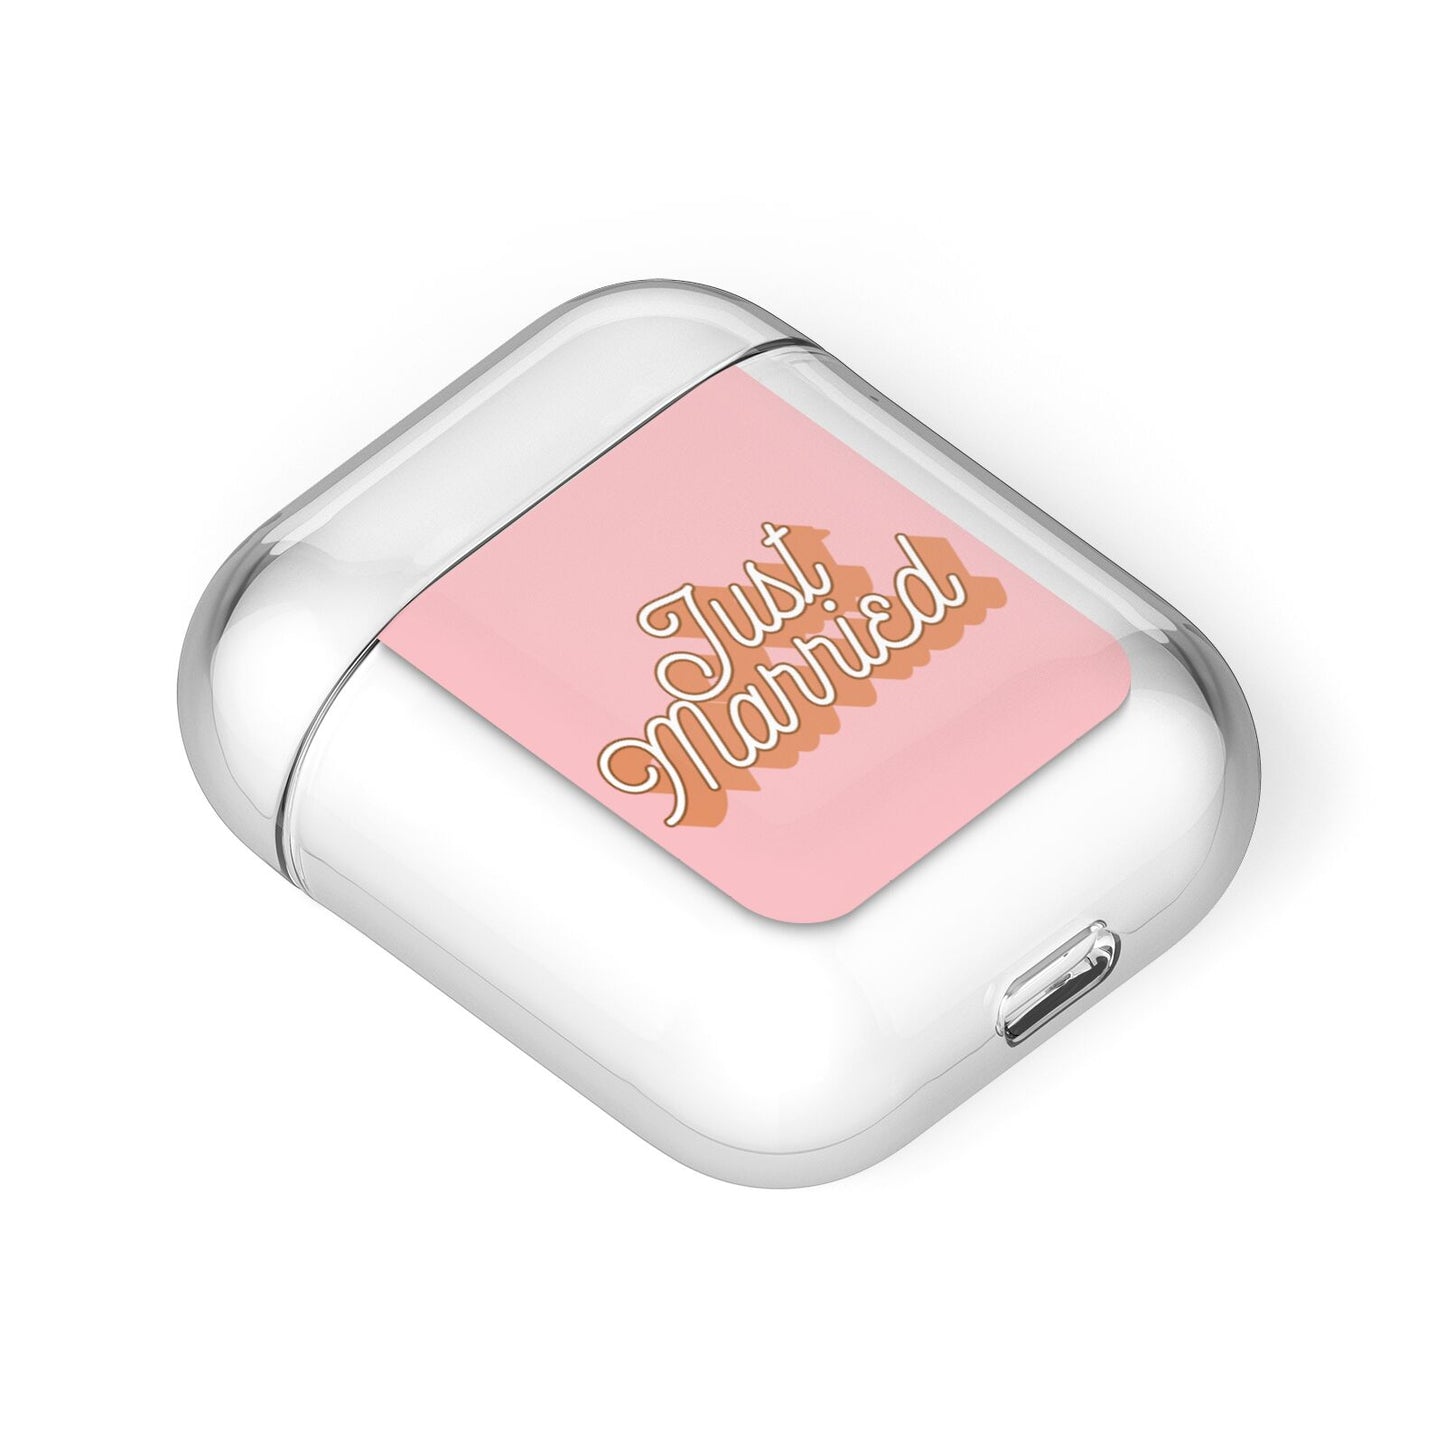 Just Married Pink AirPods Case Laid Flat